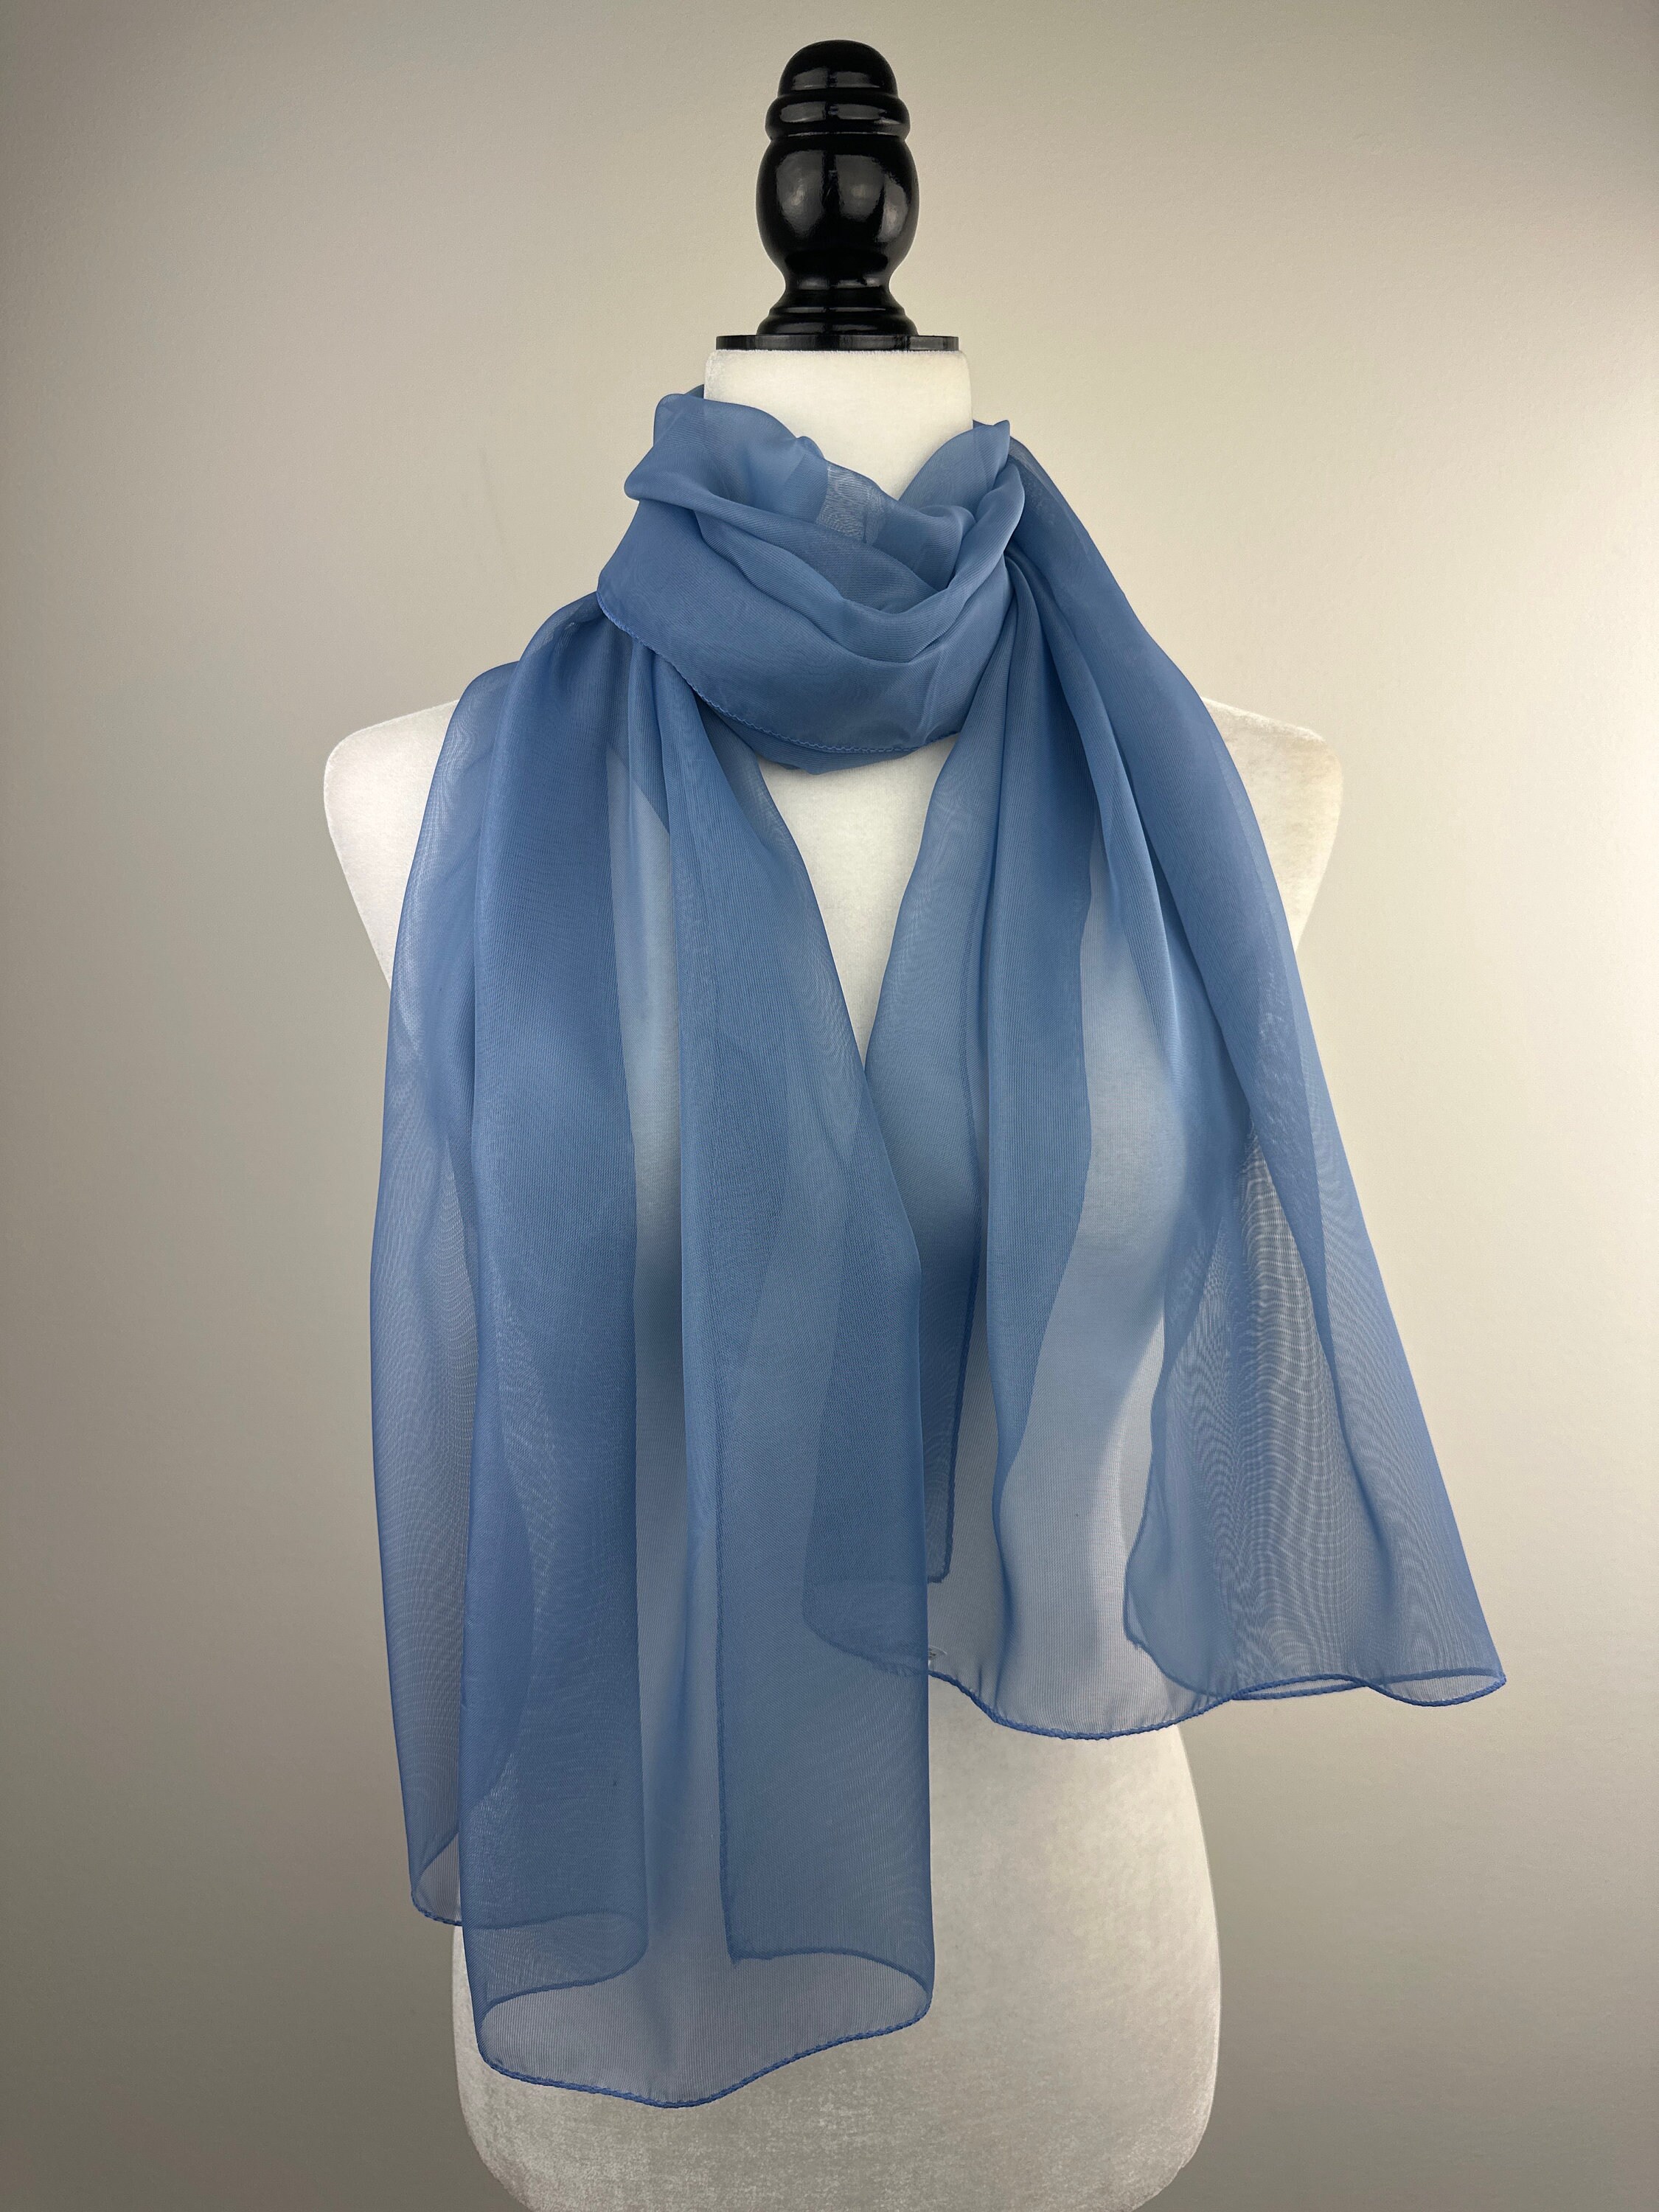 The perfect scarf for your choir — Scarves and More